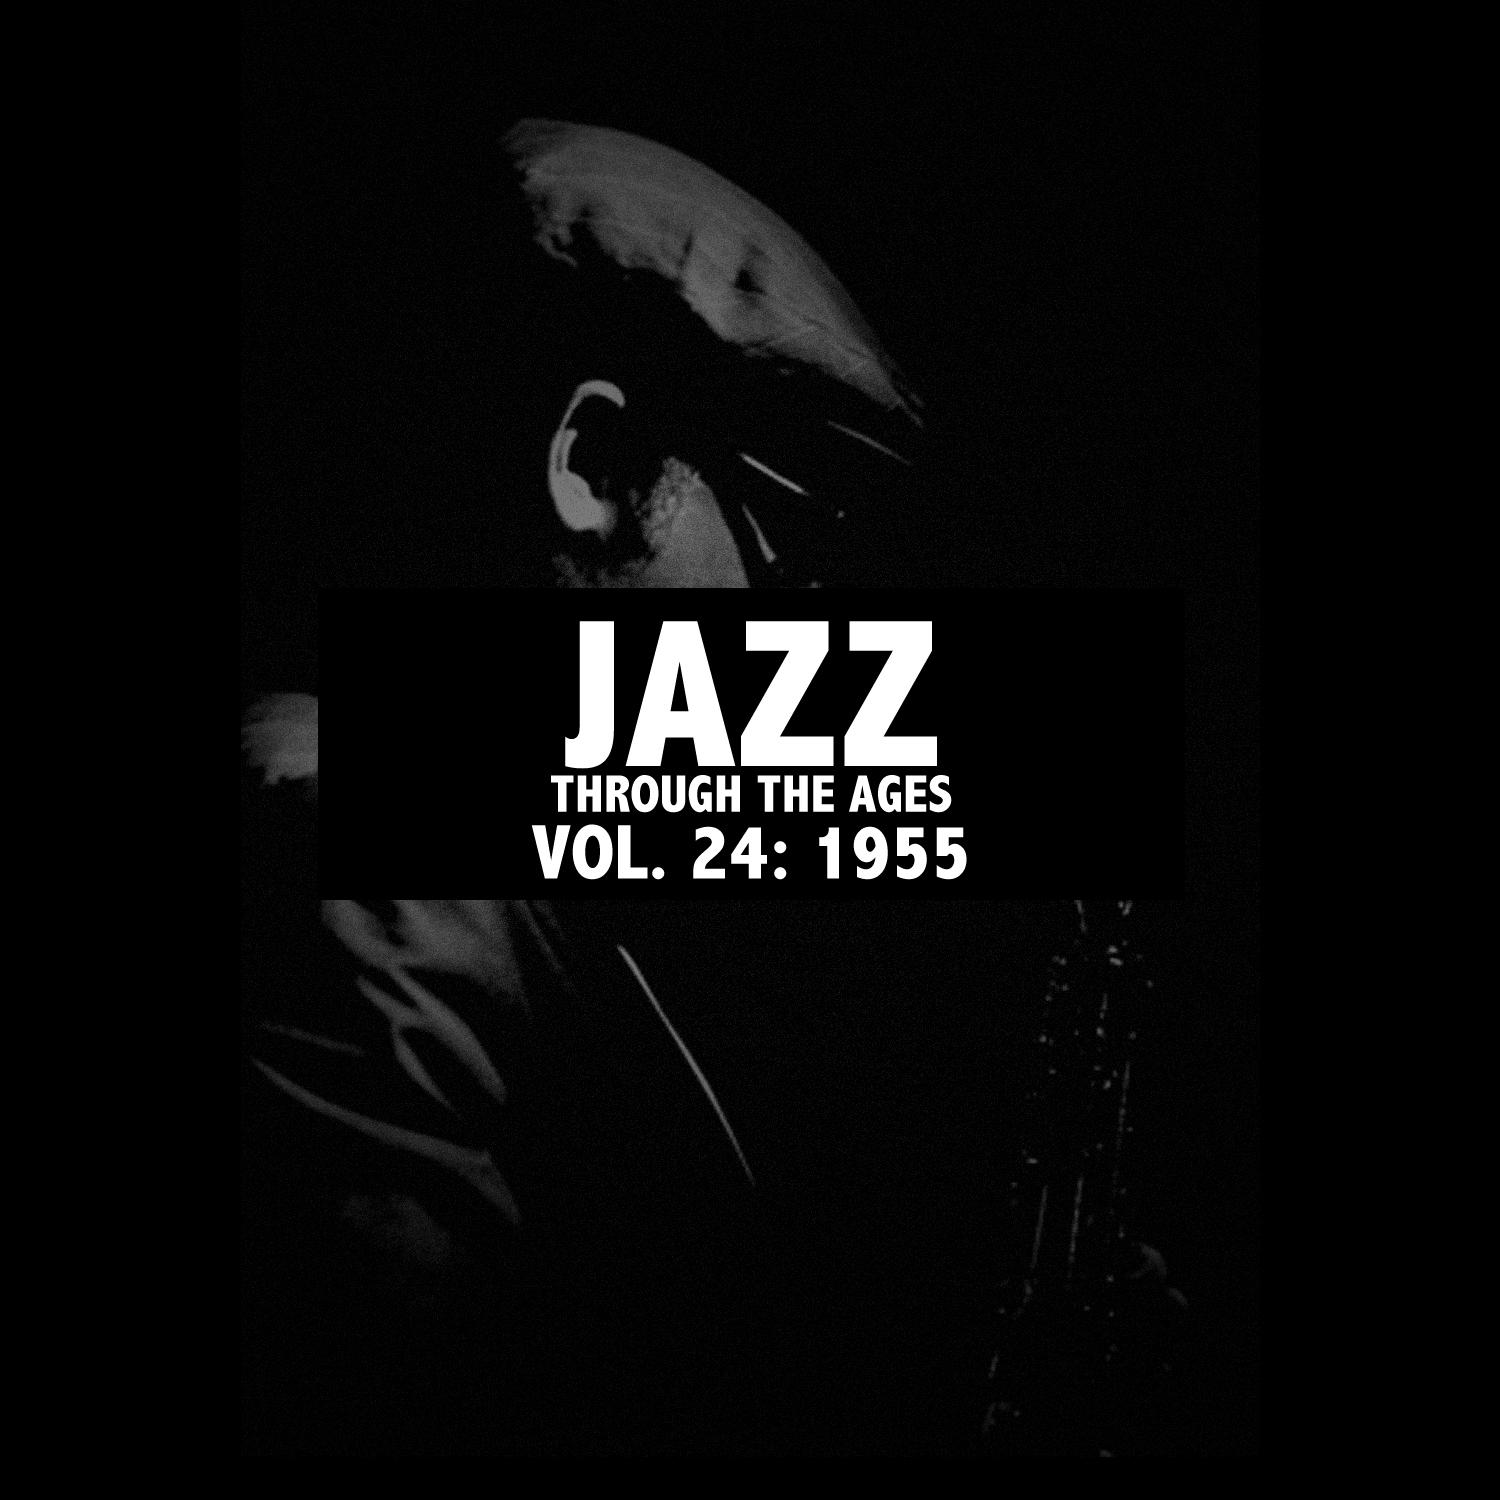 Jazz Through the Ages, Vol. 24: 1955